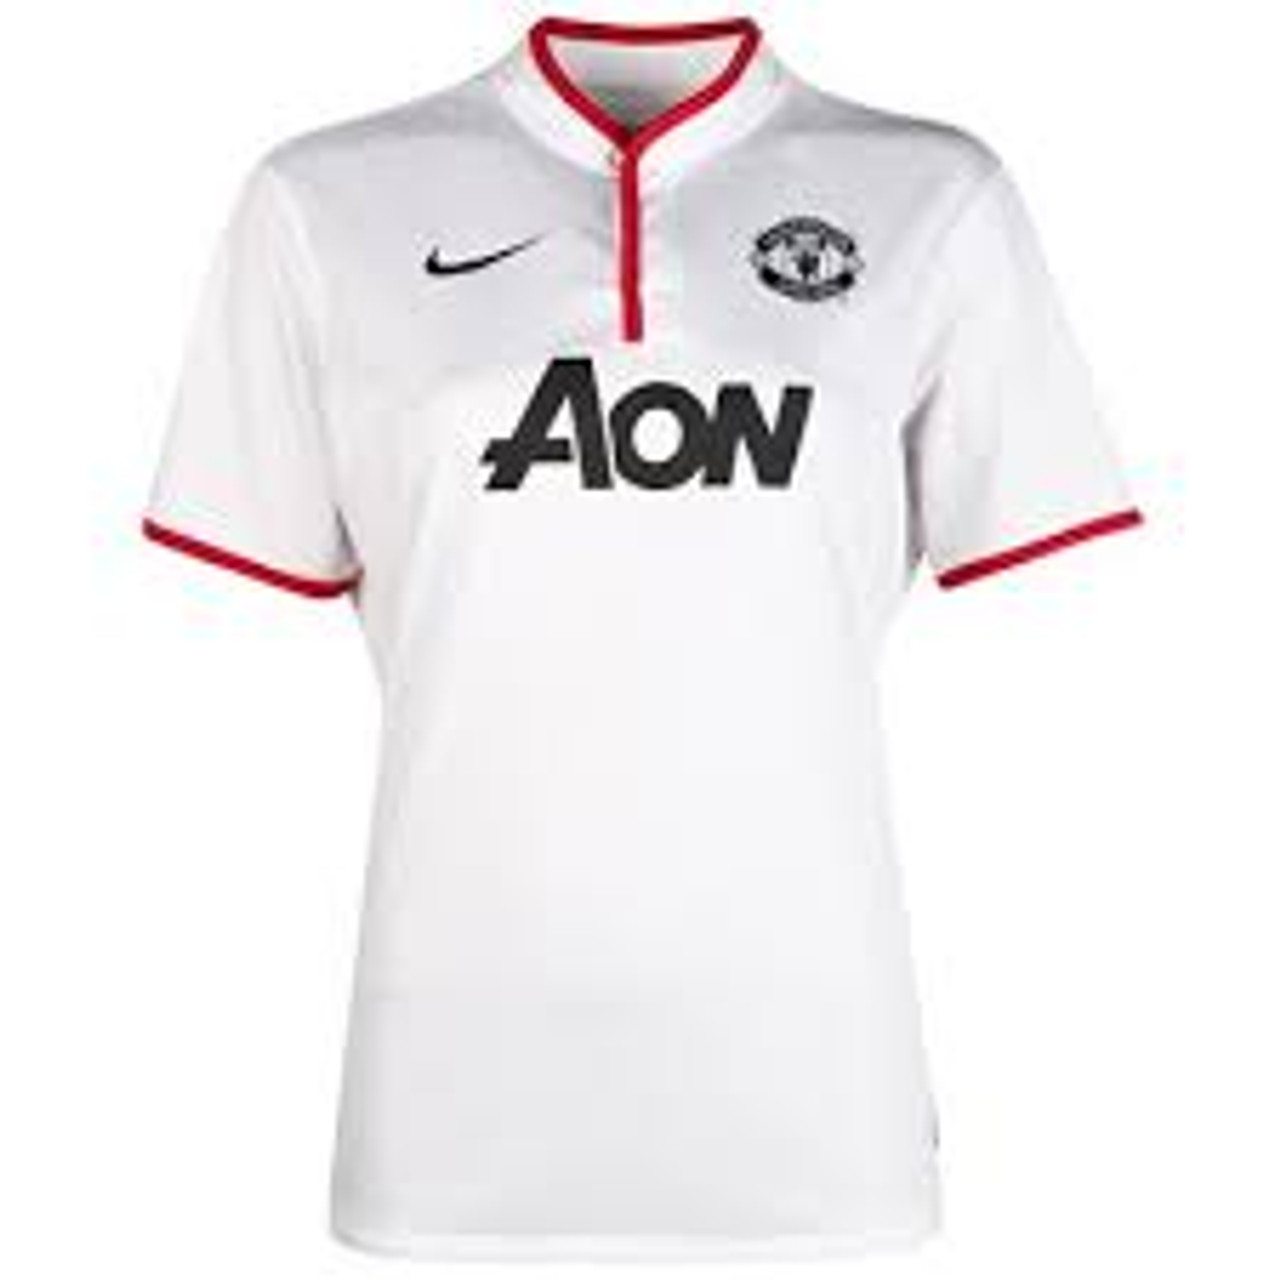 manchester united 2013 jersey